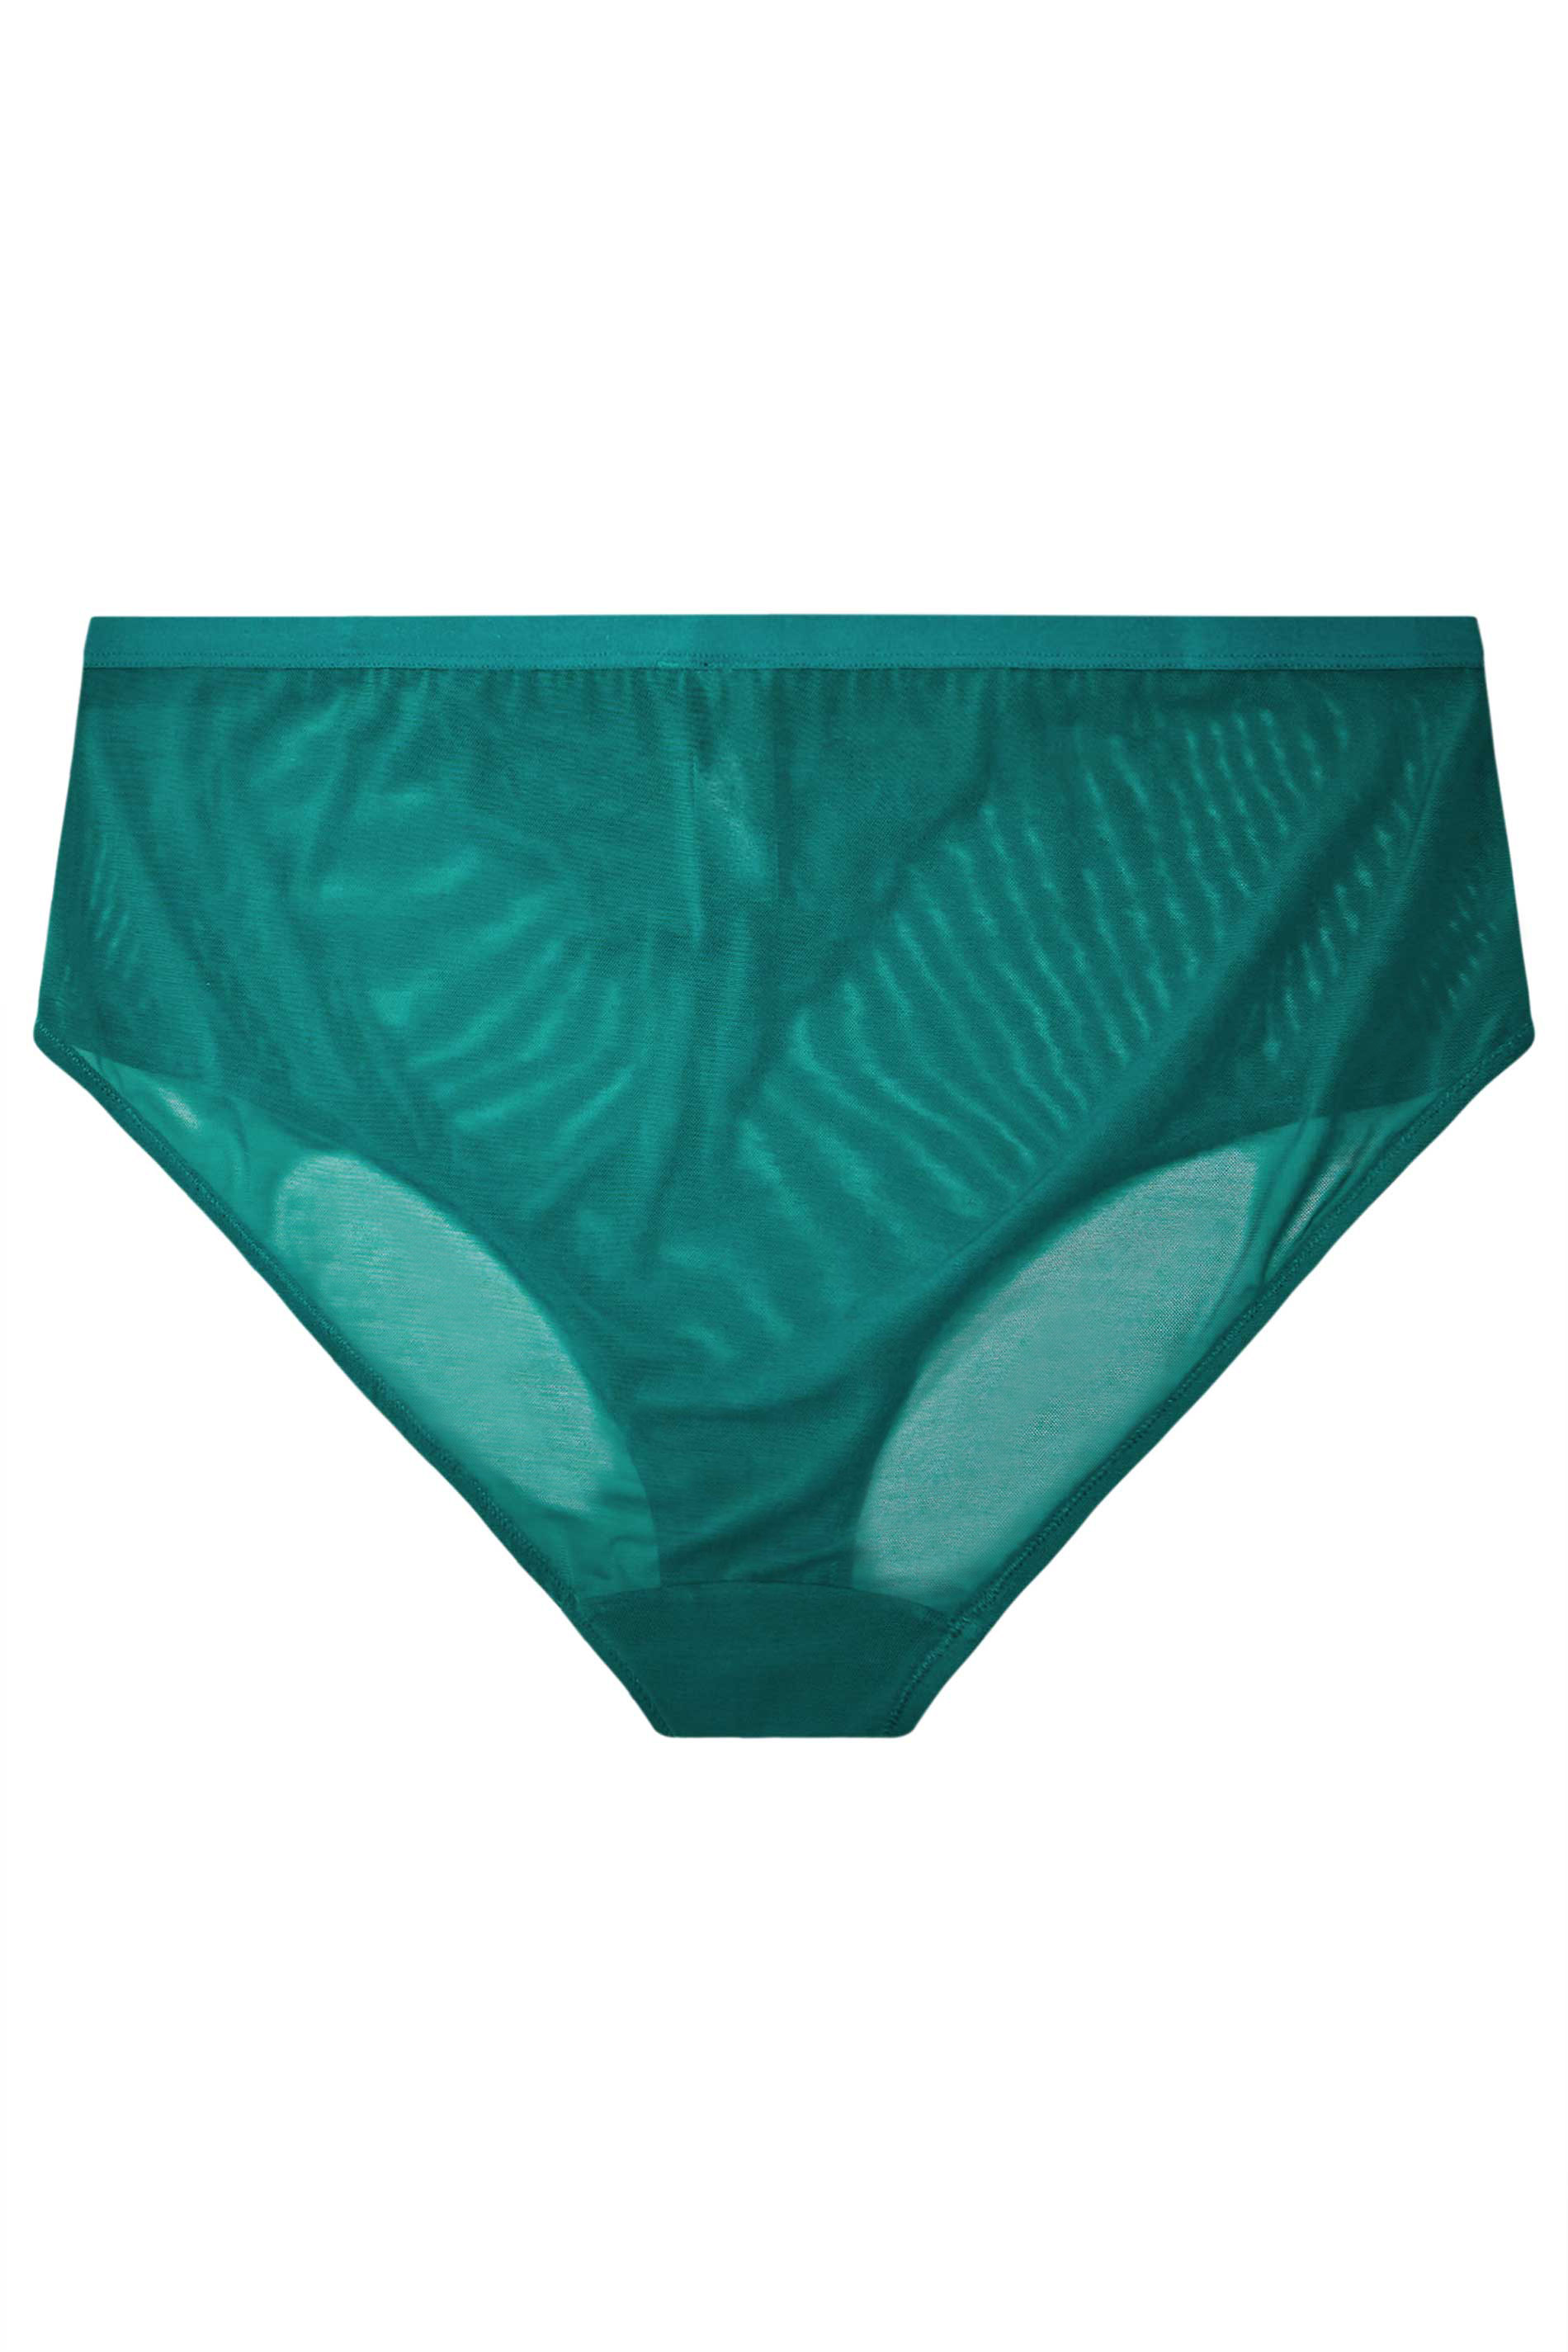 YOURS Plus Size 2 PACK Black & Green Leaf Embossed High Waisted Briefs